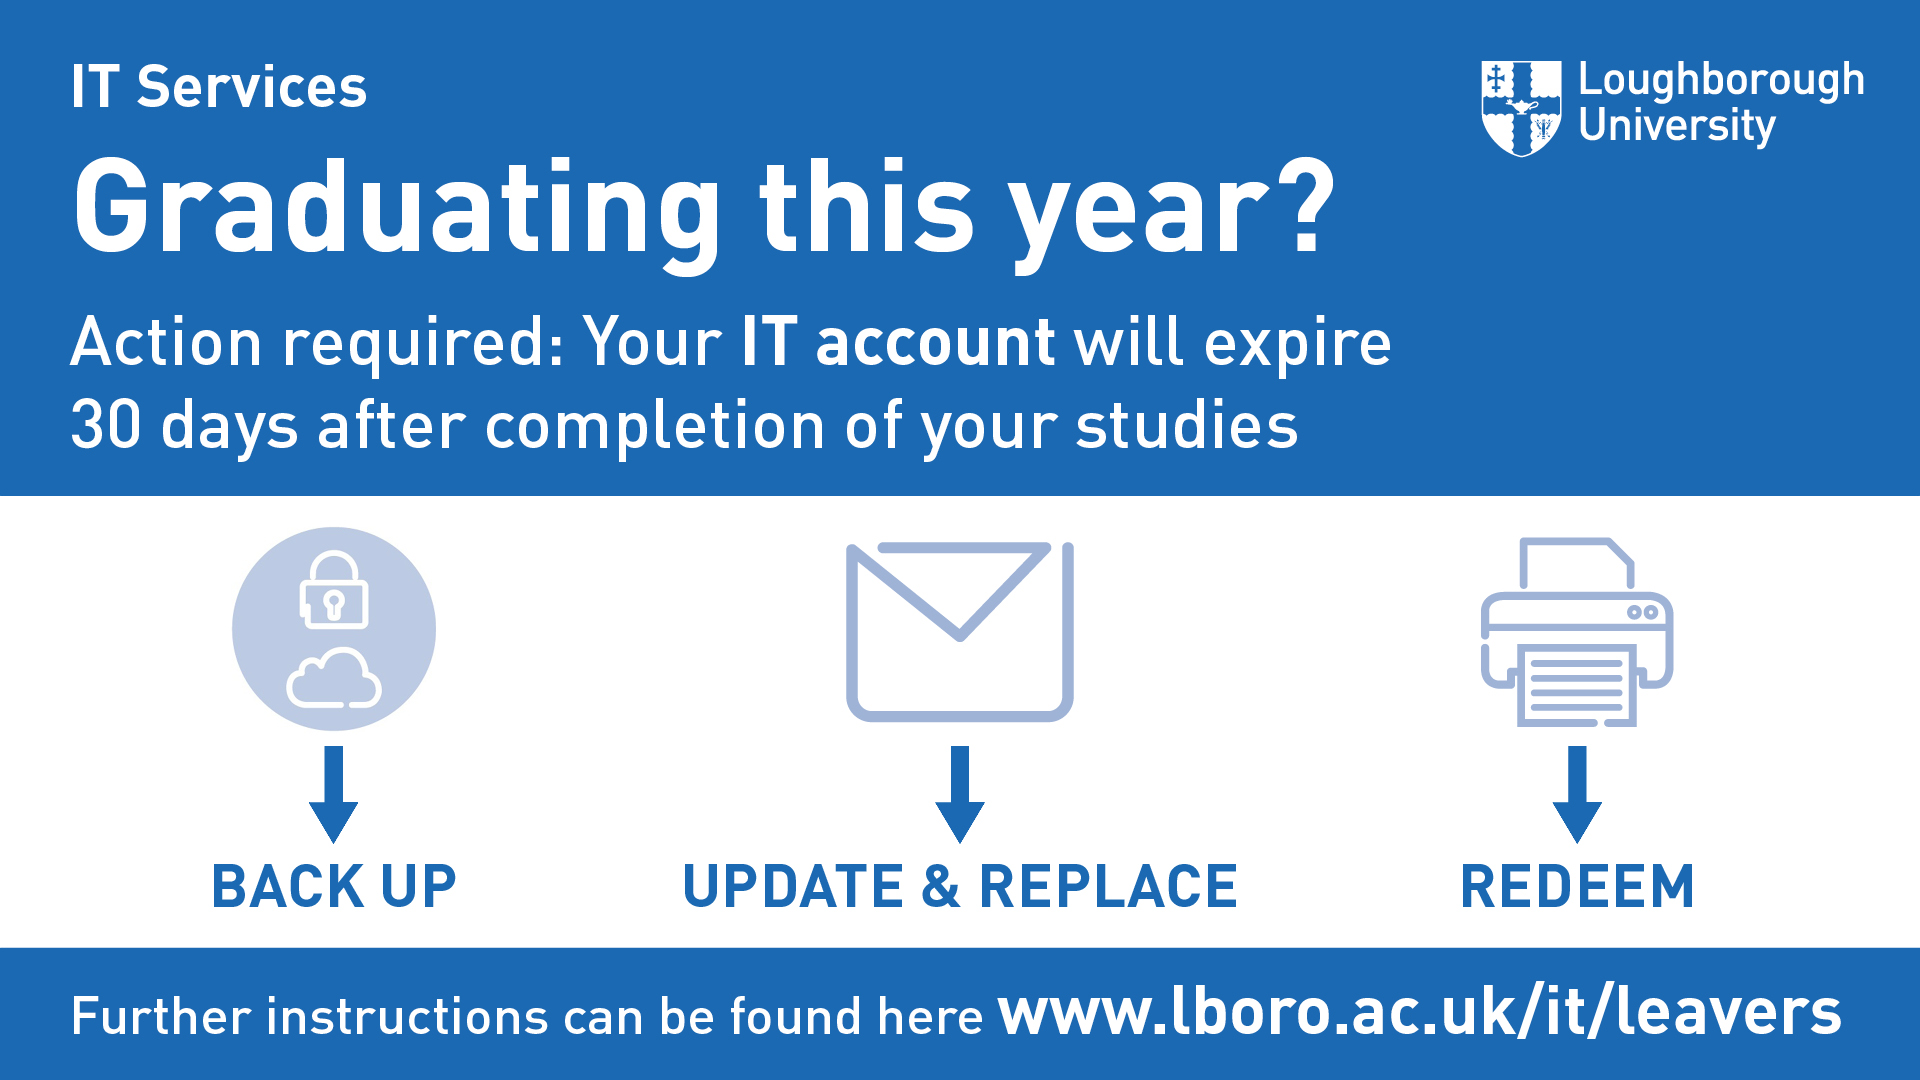 Your IT account will expire 30 days after completion of your studies. Further info: www.lboro.ac.uk/it/leavers